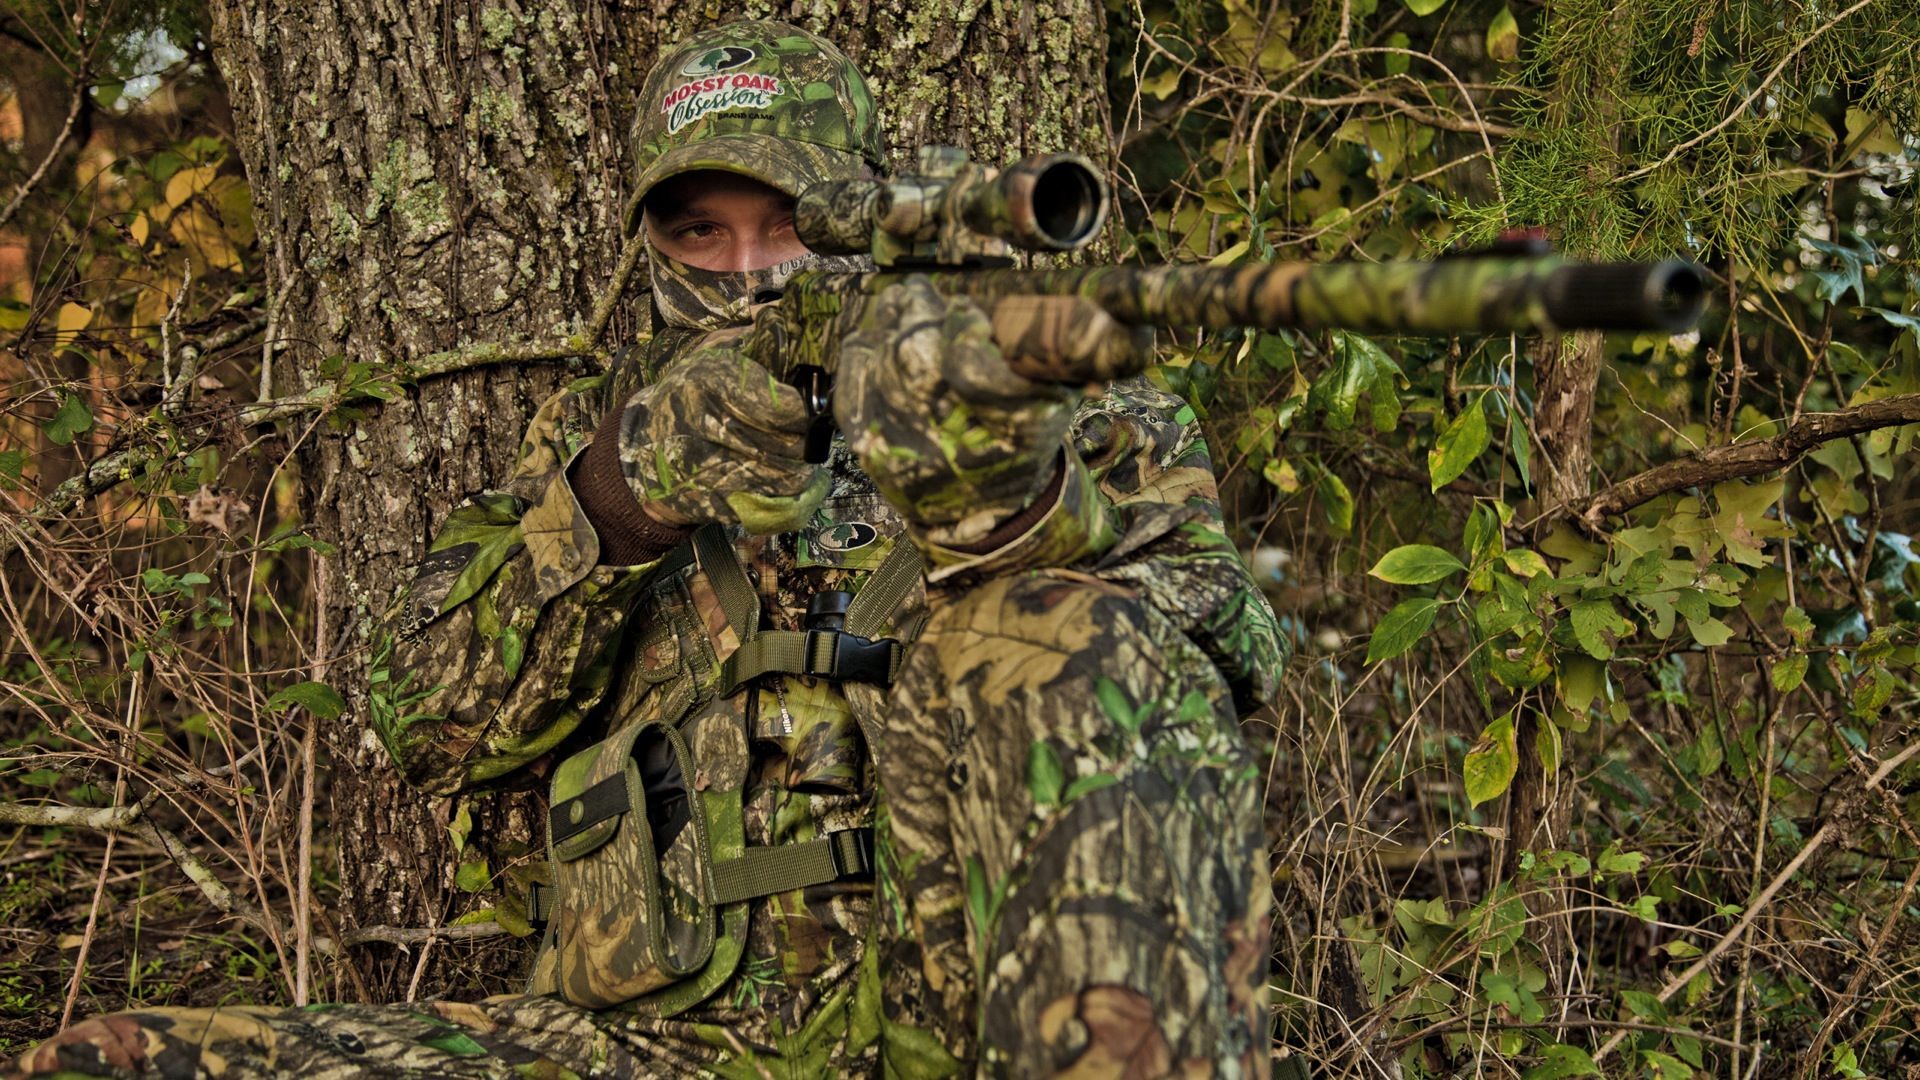 1920x1080 Realtree Camo Images.